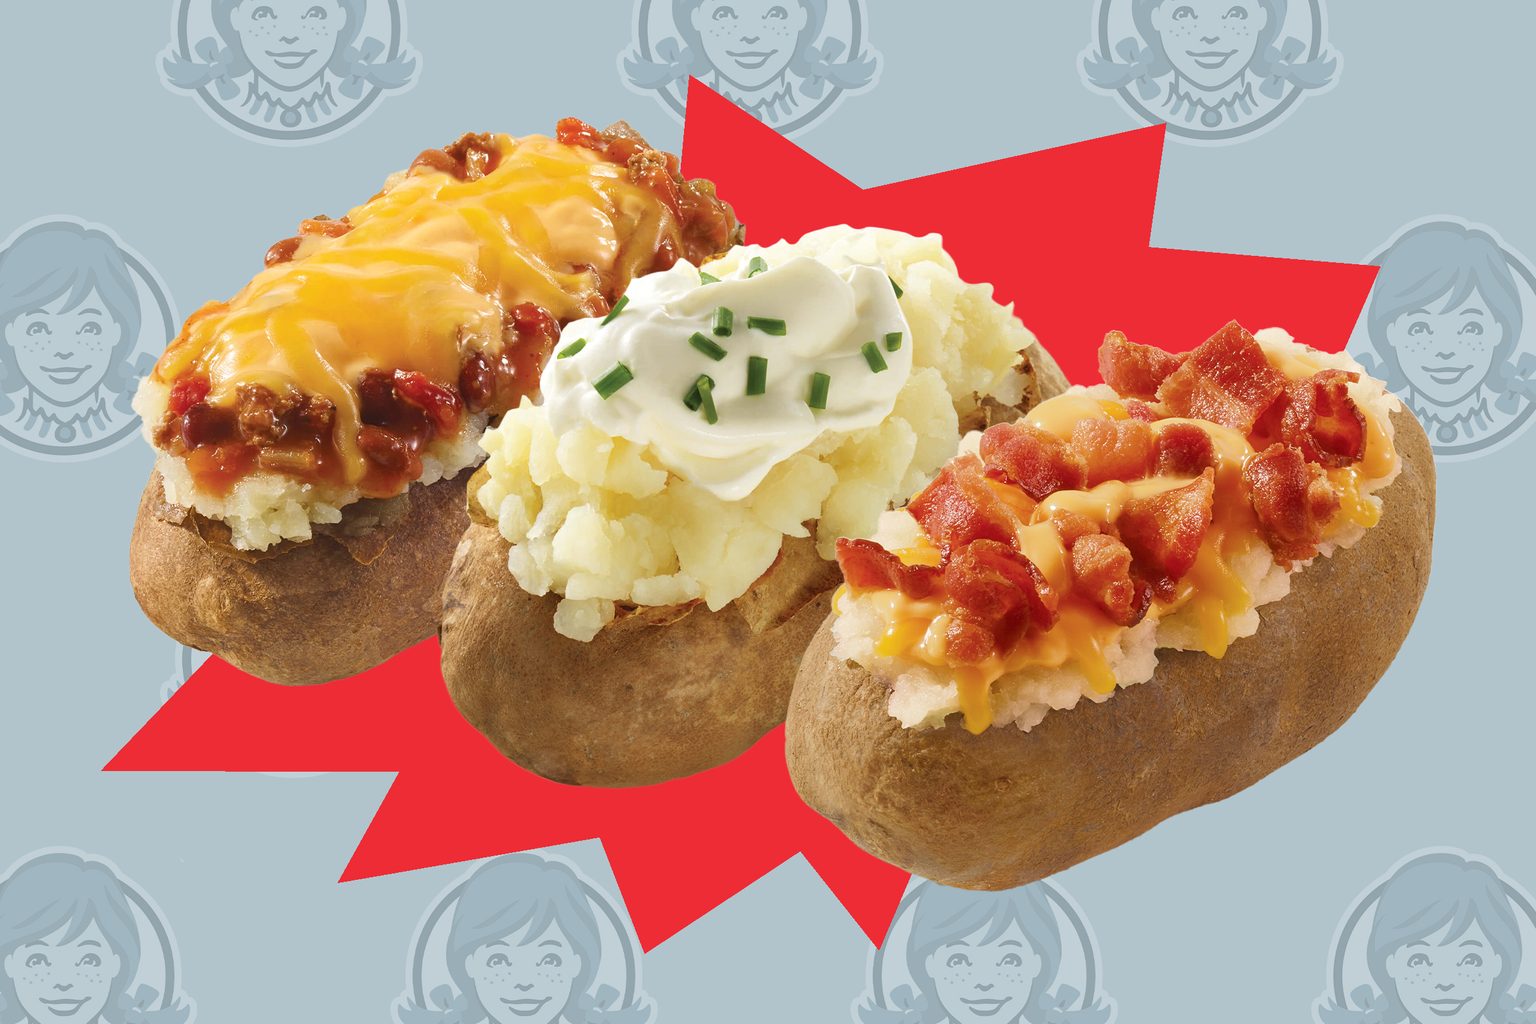 Why Wendy's Is the Only Chain Selling Baked Potatoes | Reader's Digest